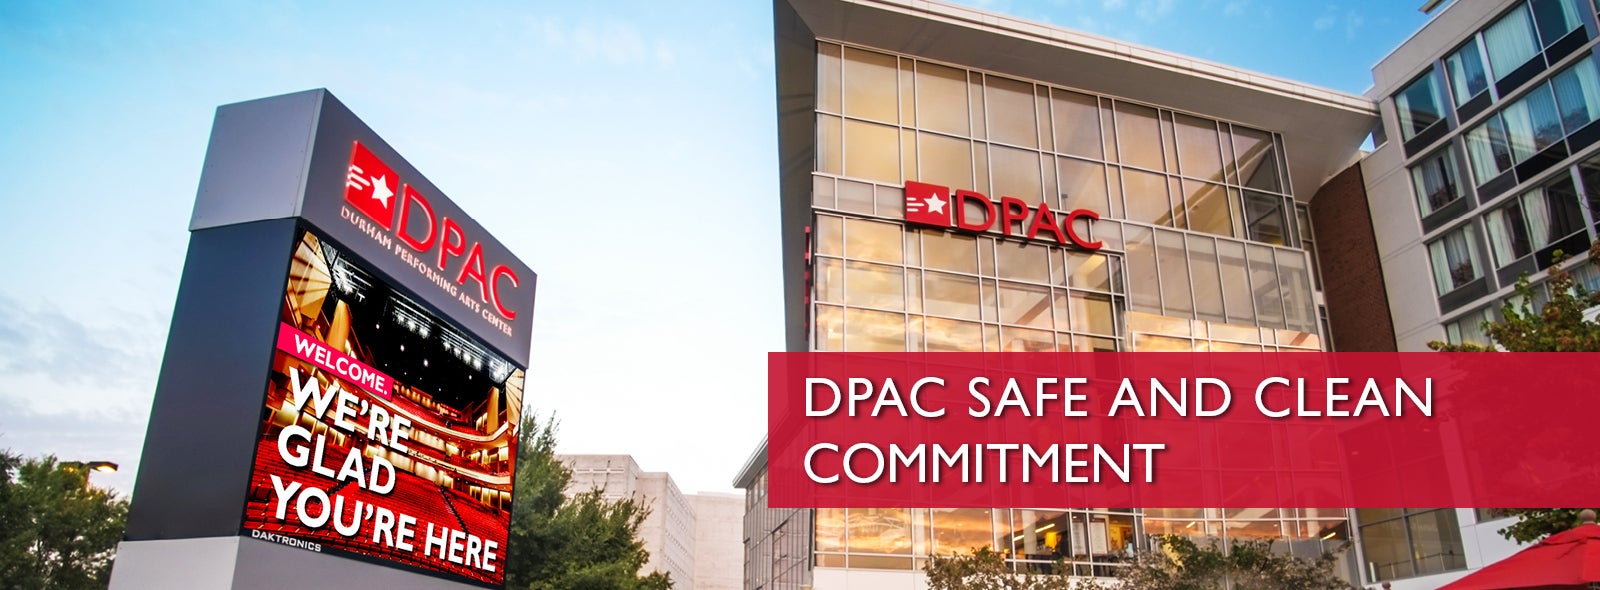 DPAC Safe and Clean Commitment